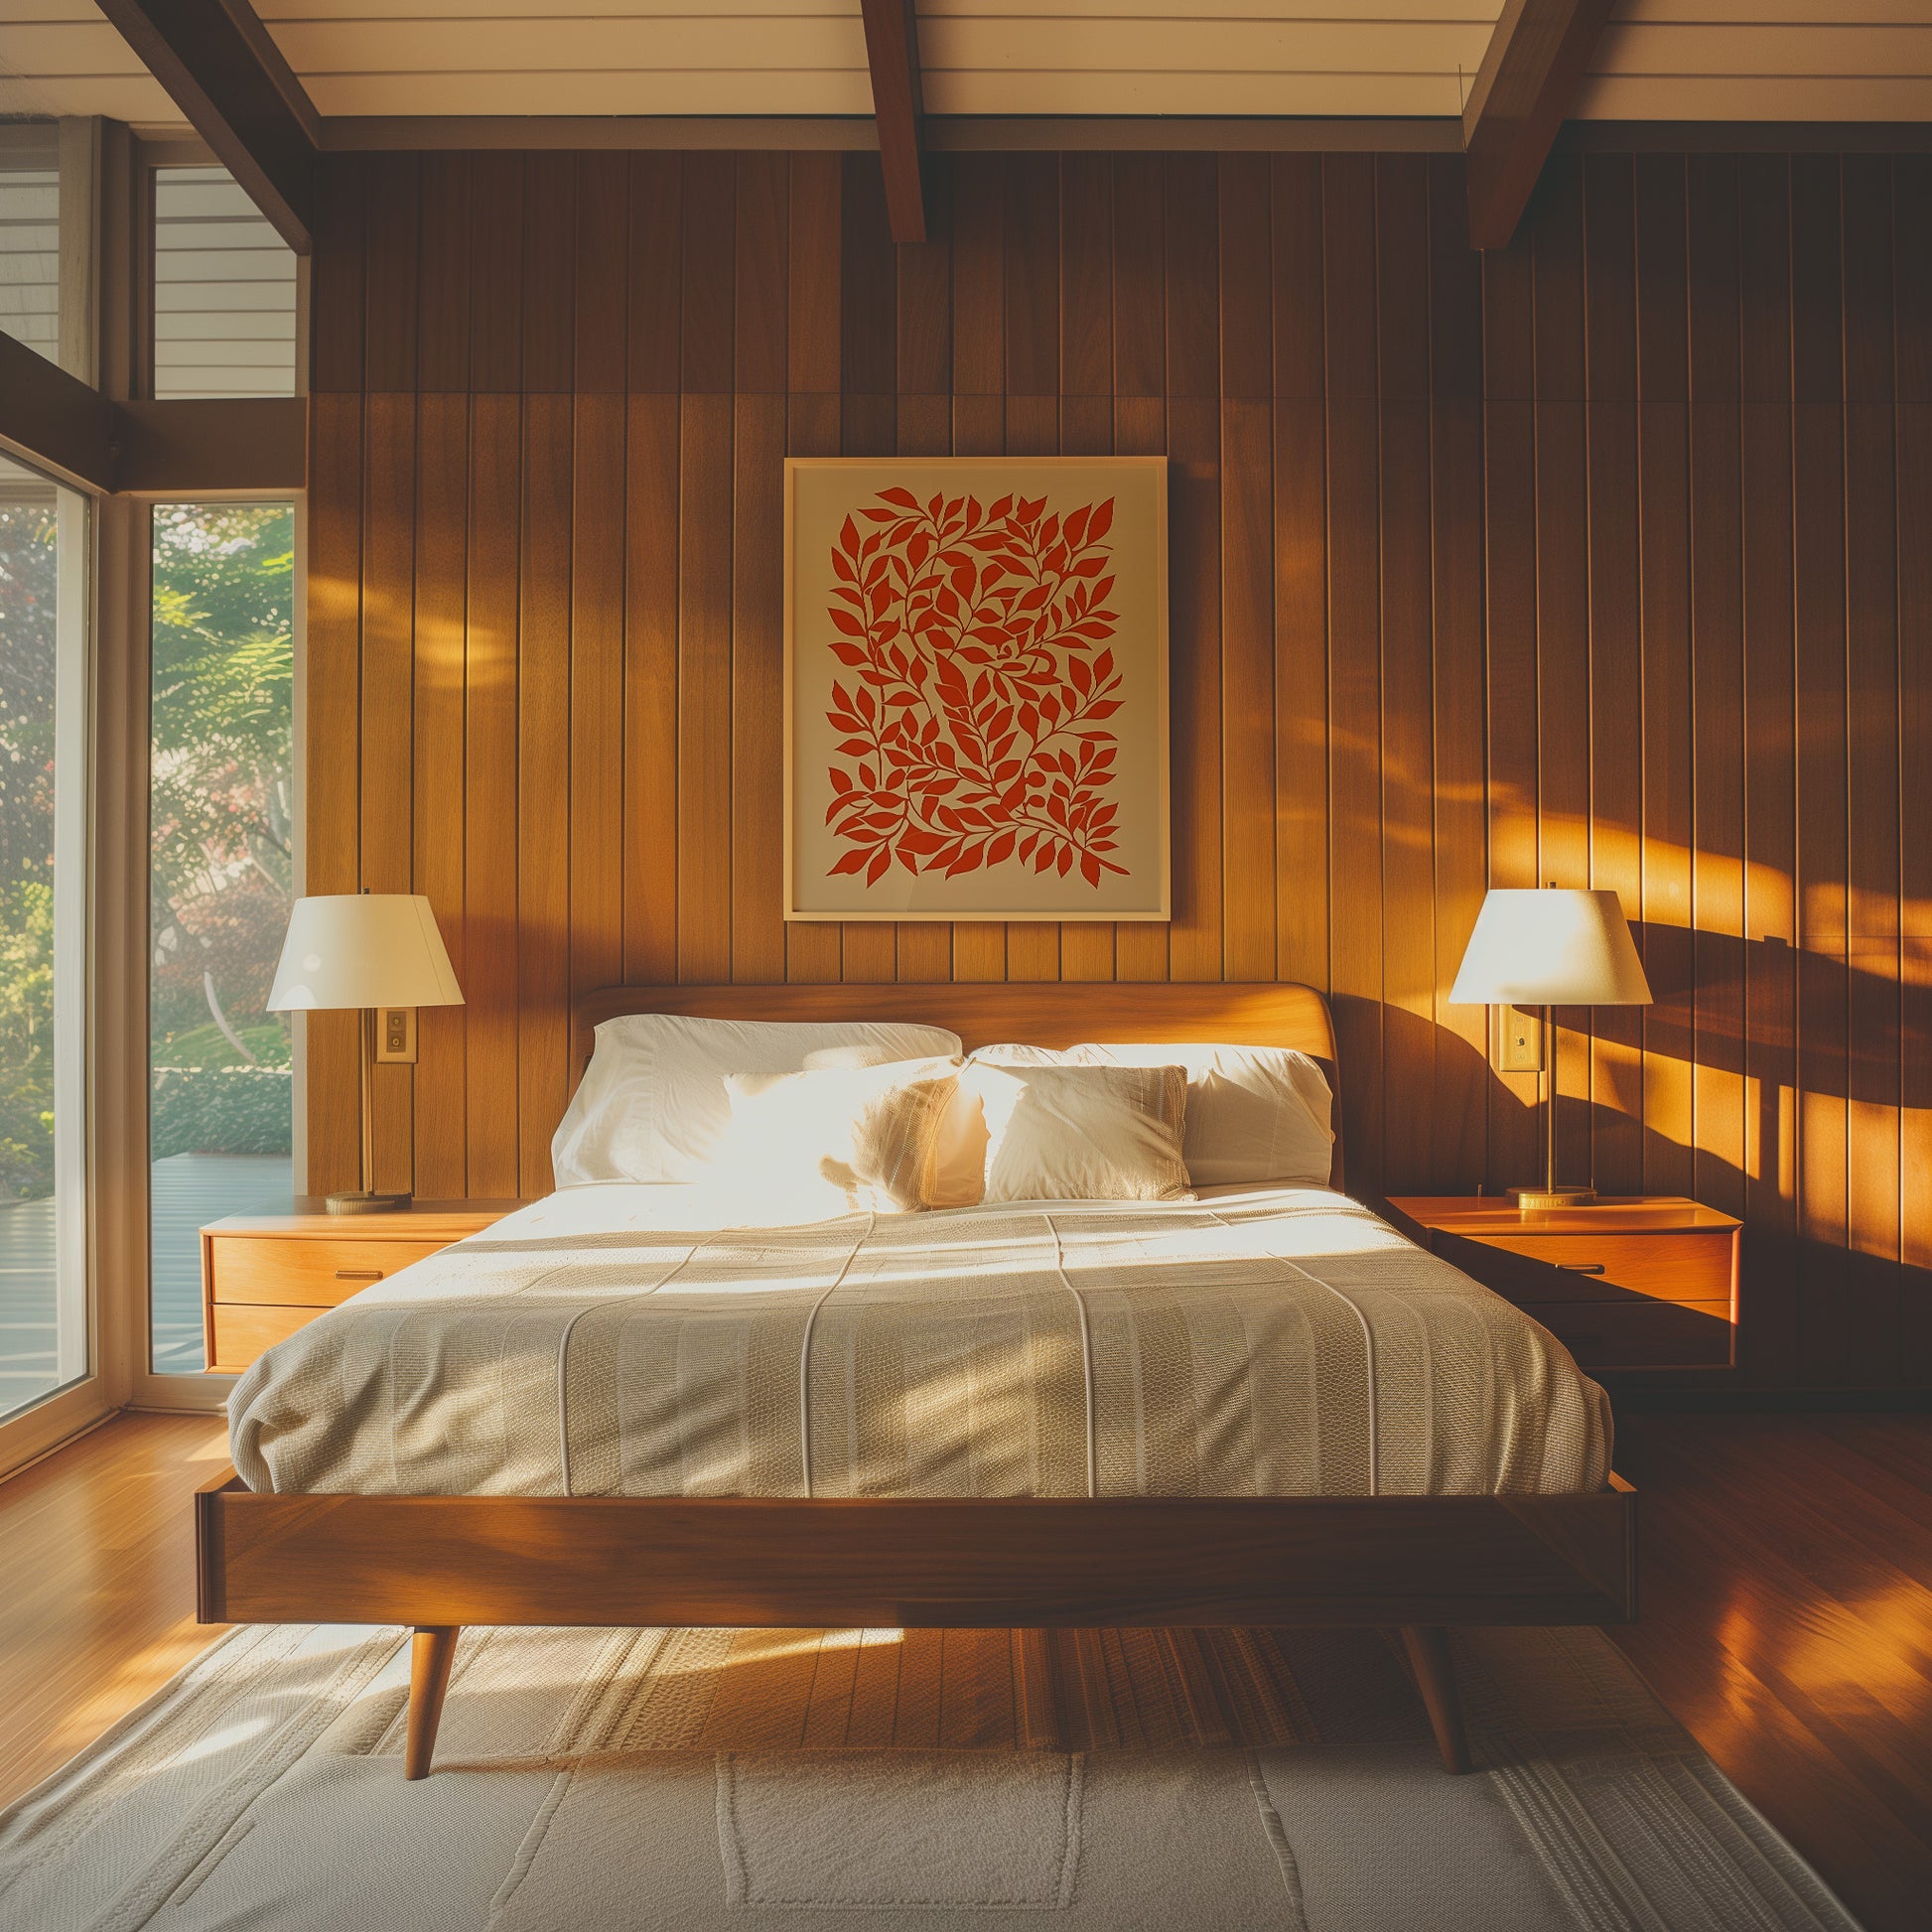 A cozy bedroom with a warm glow, wooden walls, and artwork above the bed.